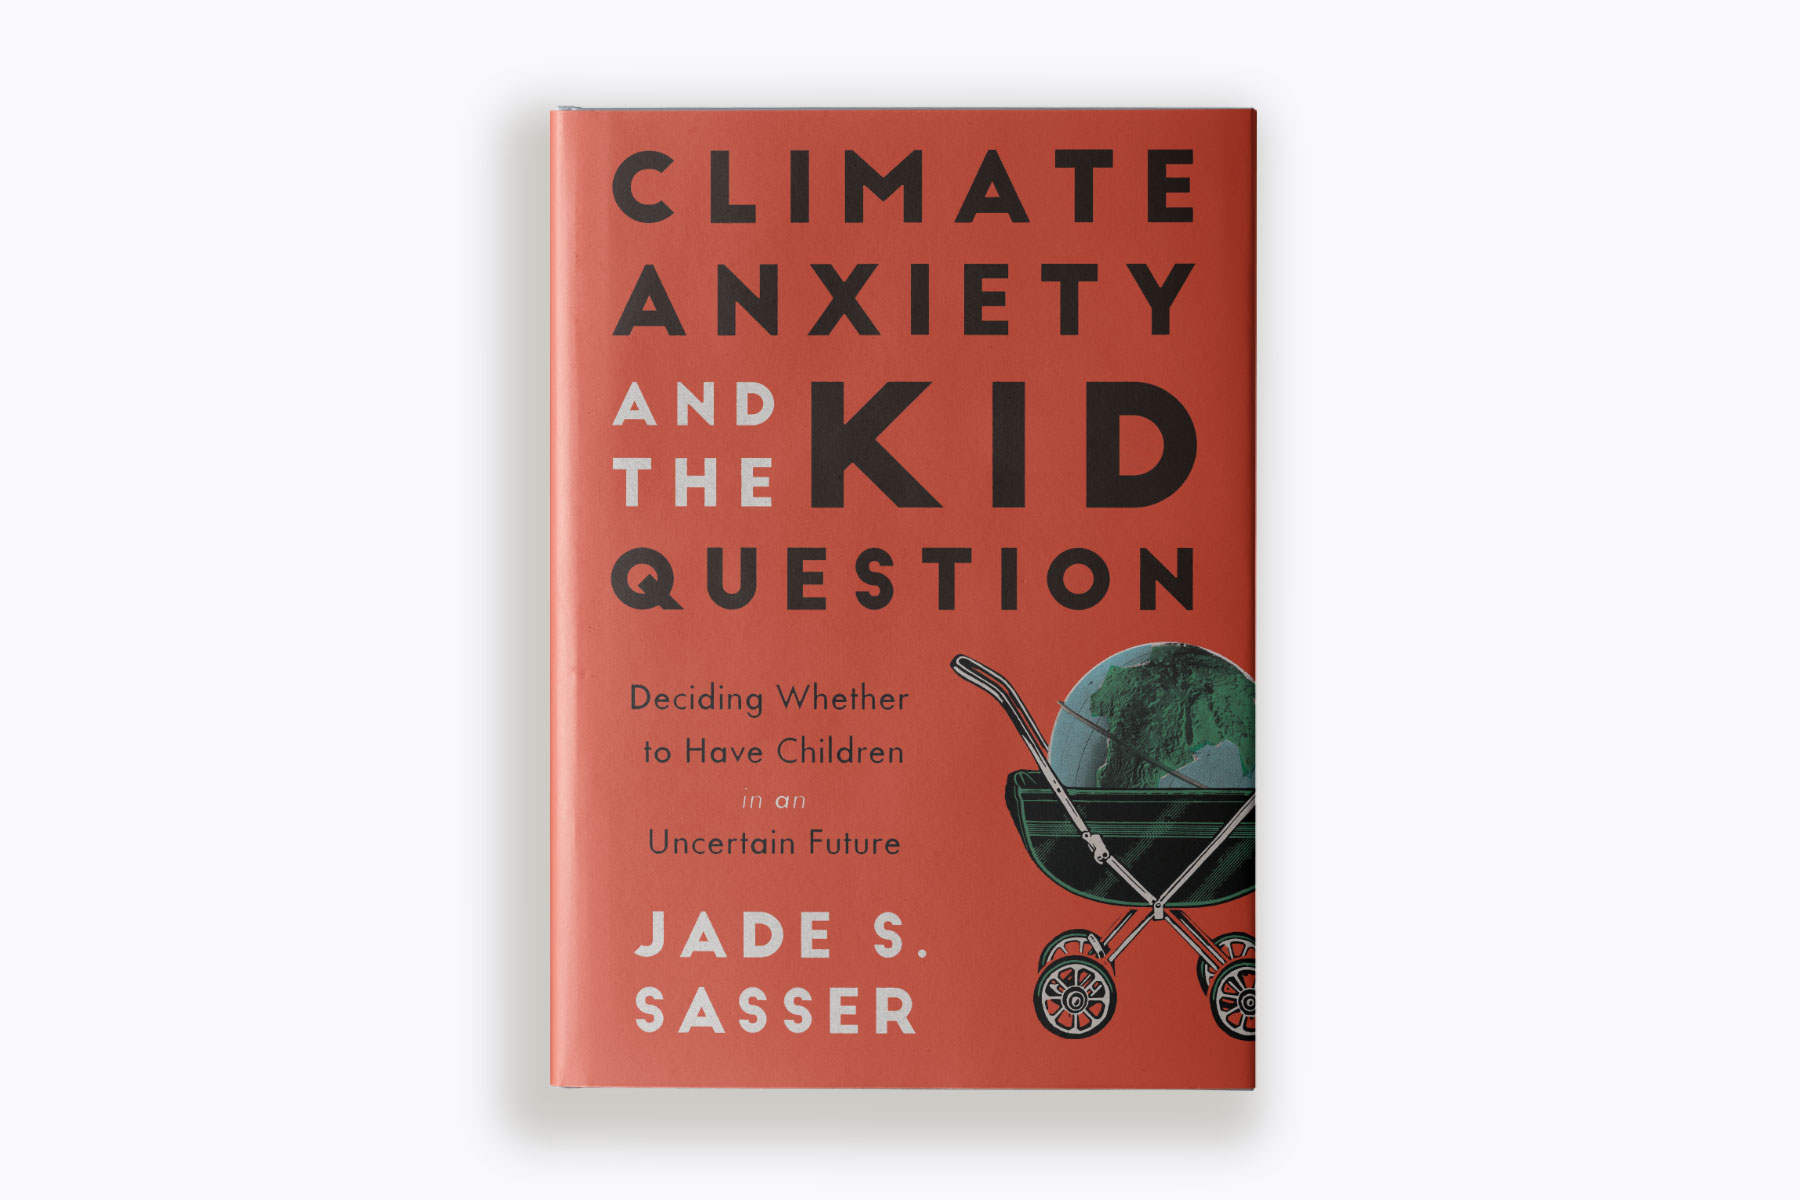 A book cover of "Climate Anxiety and the Kid Question" by author Jade S. Sasser.